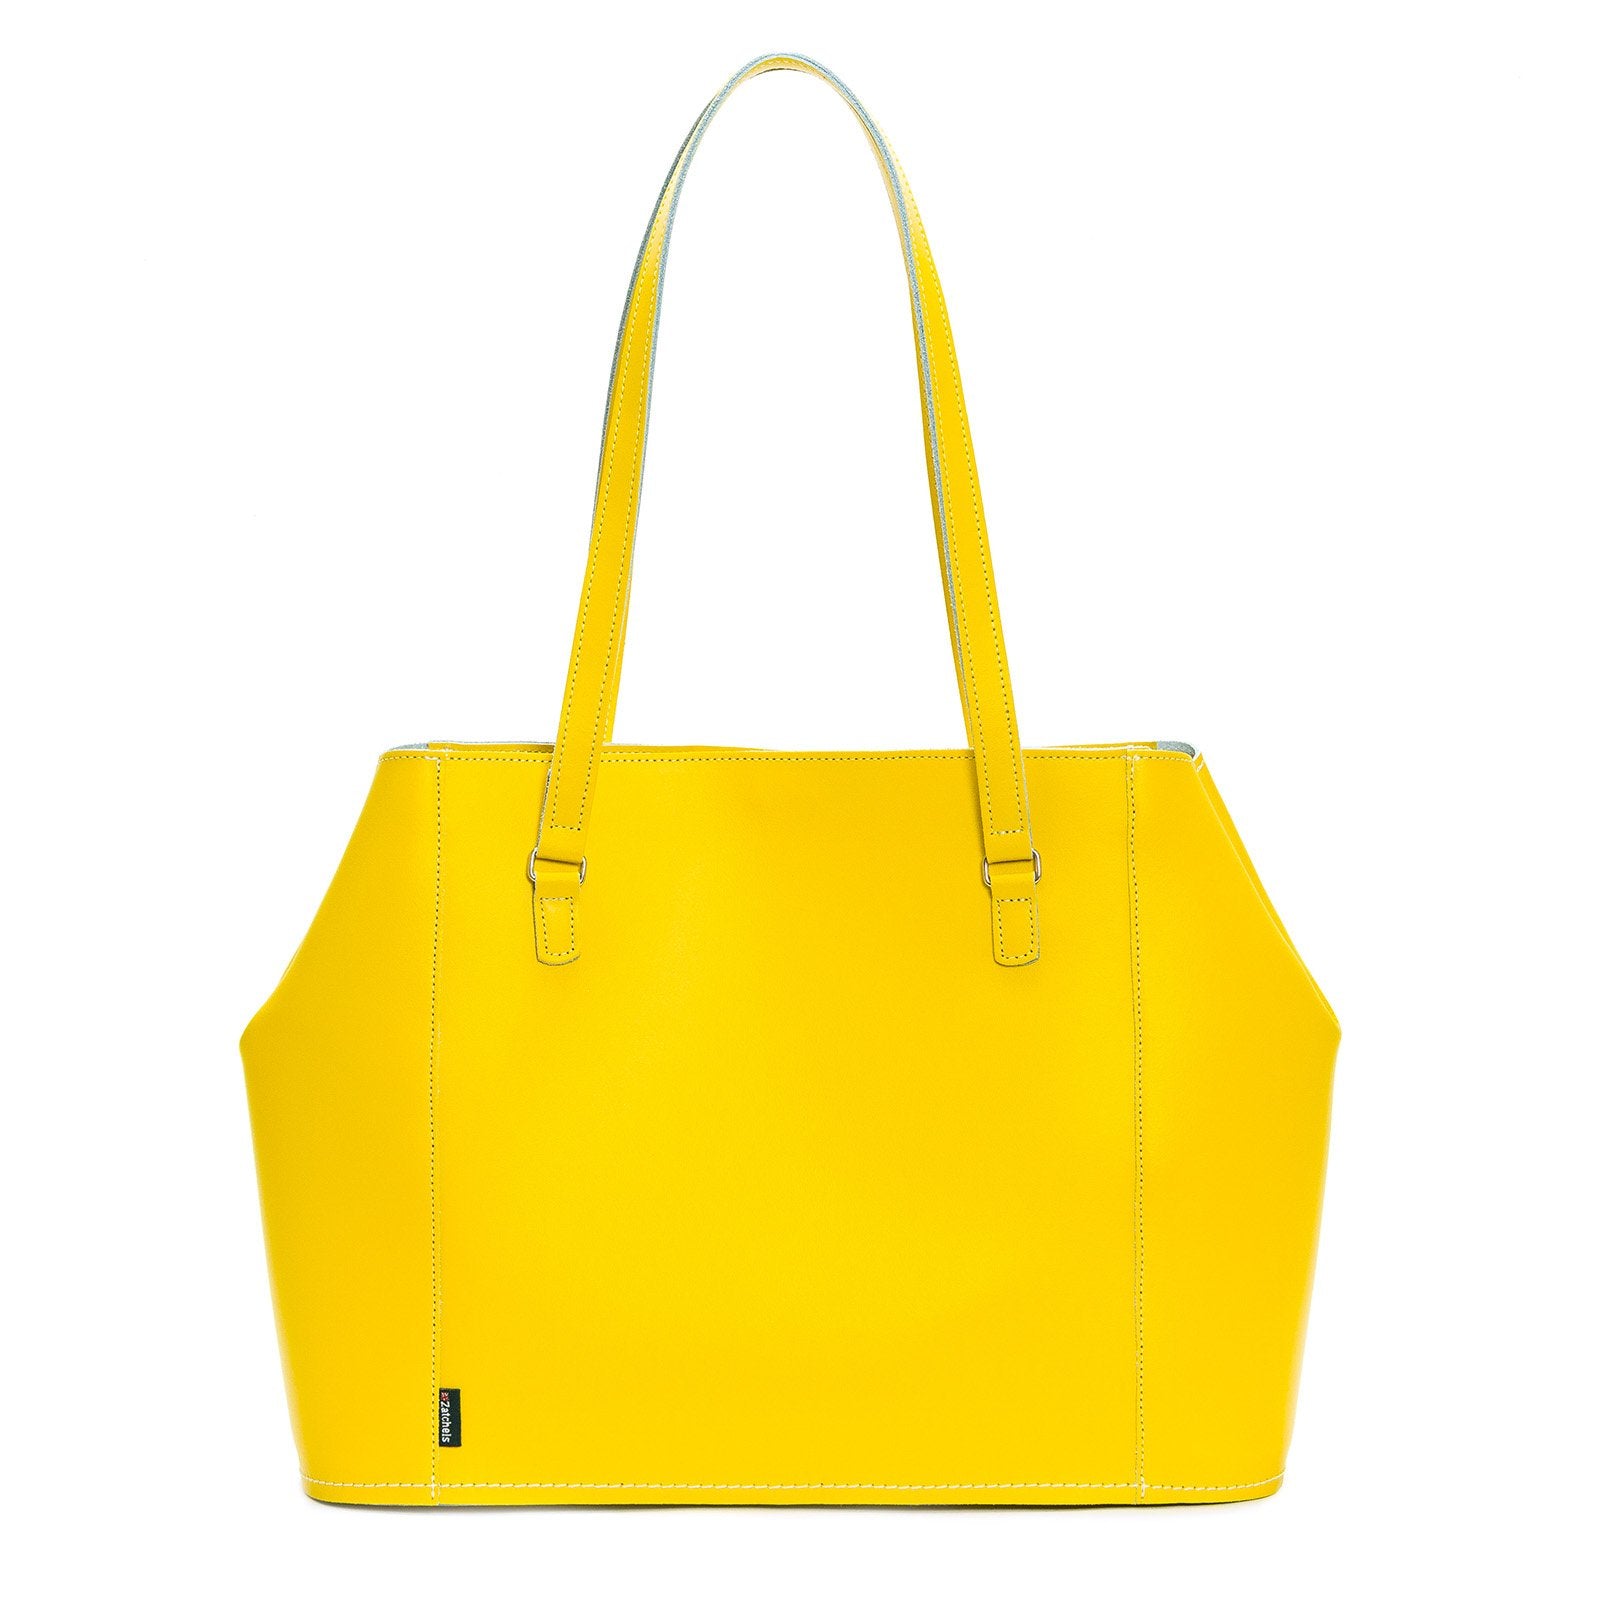 Leather Tote Bag - Pastel Daffodil Yellow